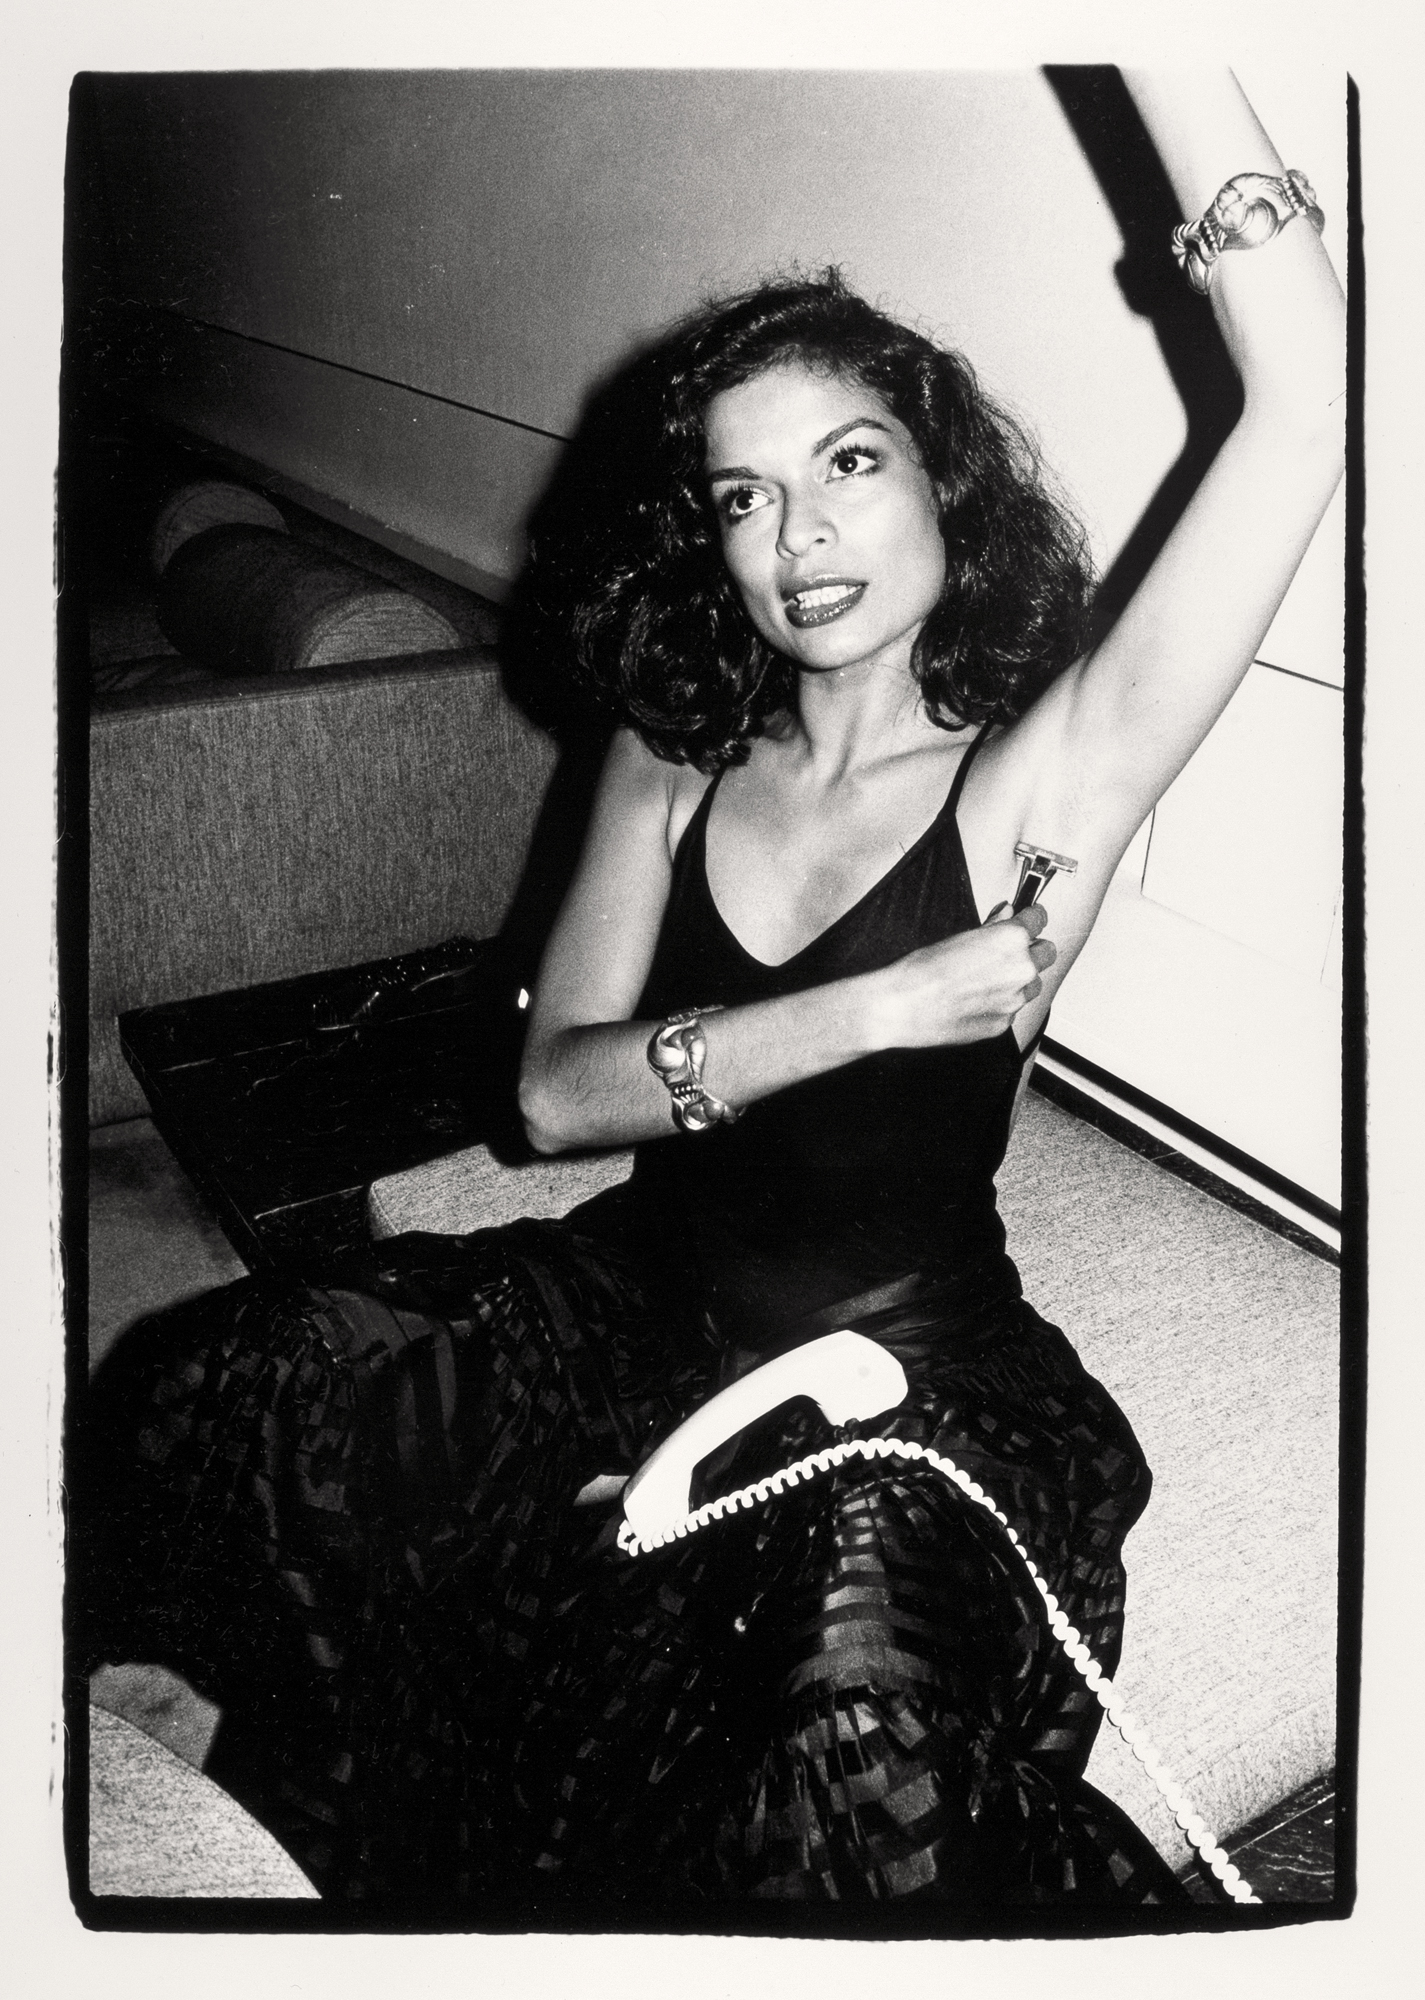 Andy Warhol, born Pittsburgh, Pennsylvania 1928, died New York City, New York 1987, <em>Bianca Jagger at Halston’s house</em>, New York, no. 1 from the portfolio <em>Photographs</em>, 1976; published 1980, New York, United States, gelatin- silver photograph, 40.8 x 28.8 cm (image), 50.5 x 41.0 cm (sheet); James and Diana Ramsay Fund 2020, Art Gallery of South Australia, Adelaide, © Andy Warhol Foundation for the Visual Arts, Inc. ARS/Copyright Agency